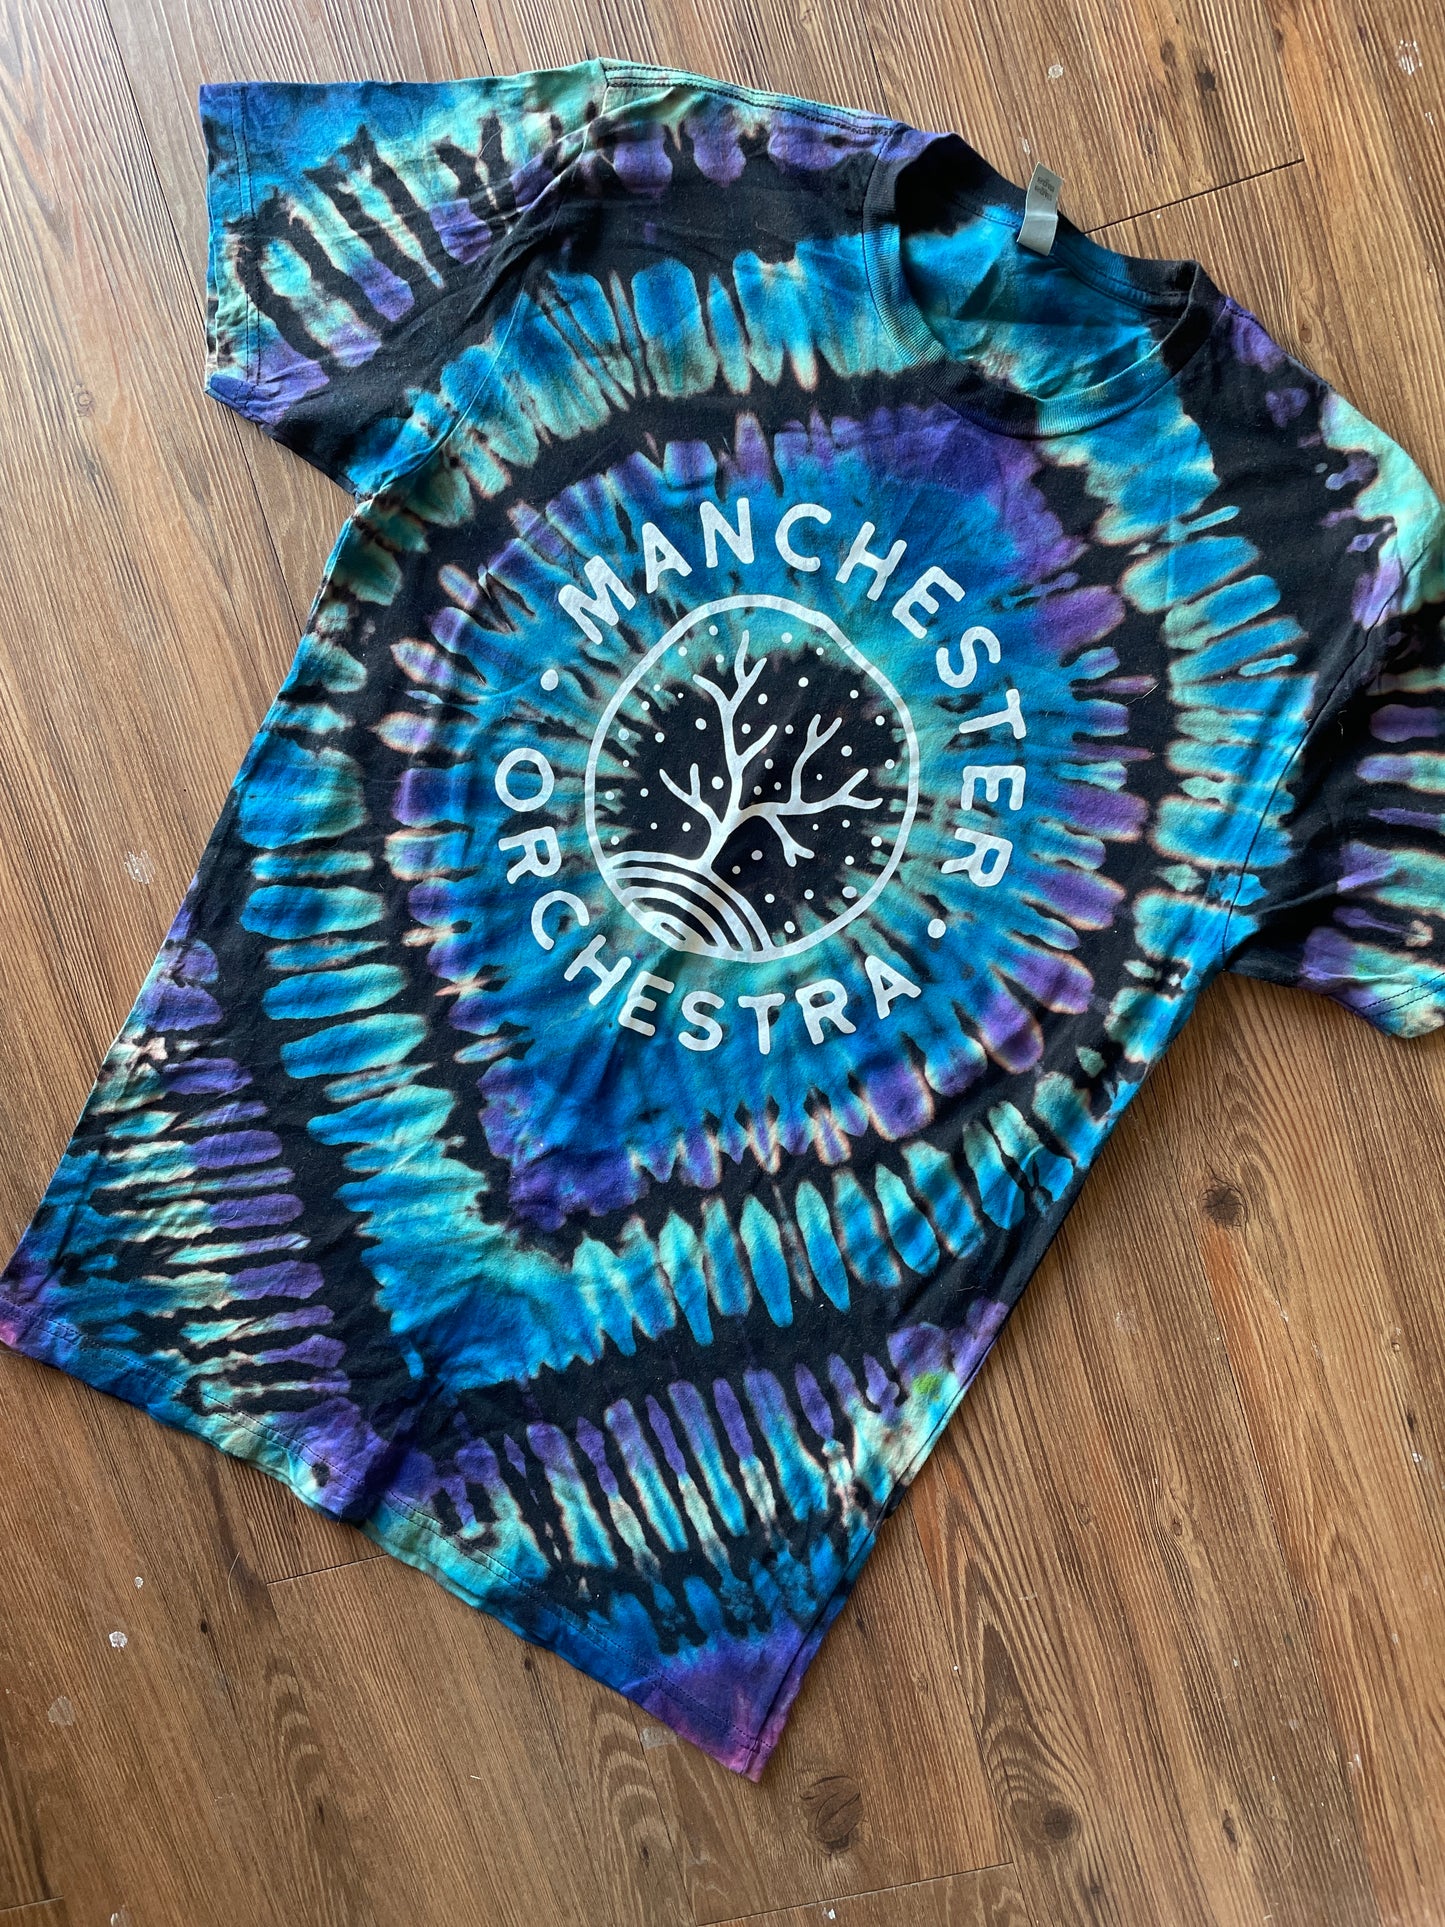 LARGE Men’s Manchester Orchestra Tie Dye T-Shirt | Blue and Purple Reverse Tie Dye Long Sleeve